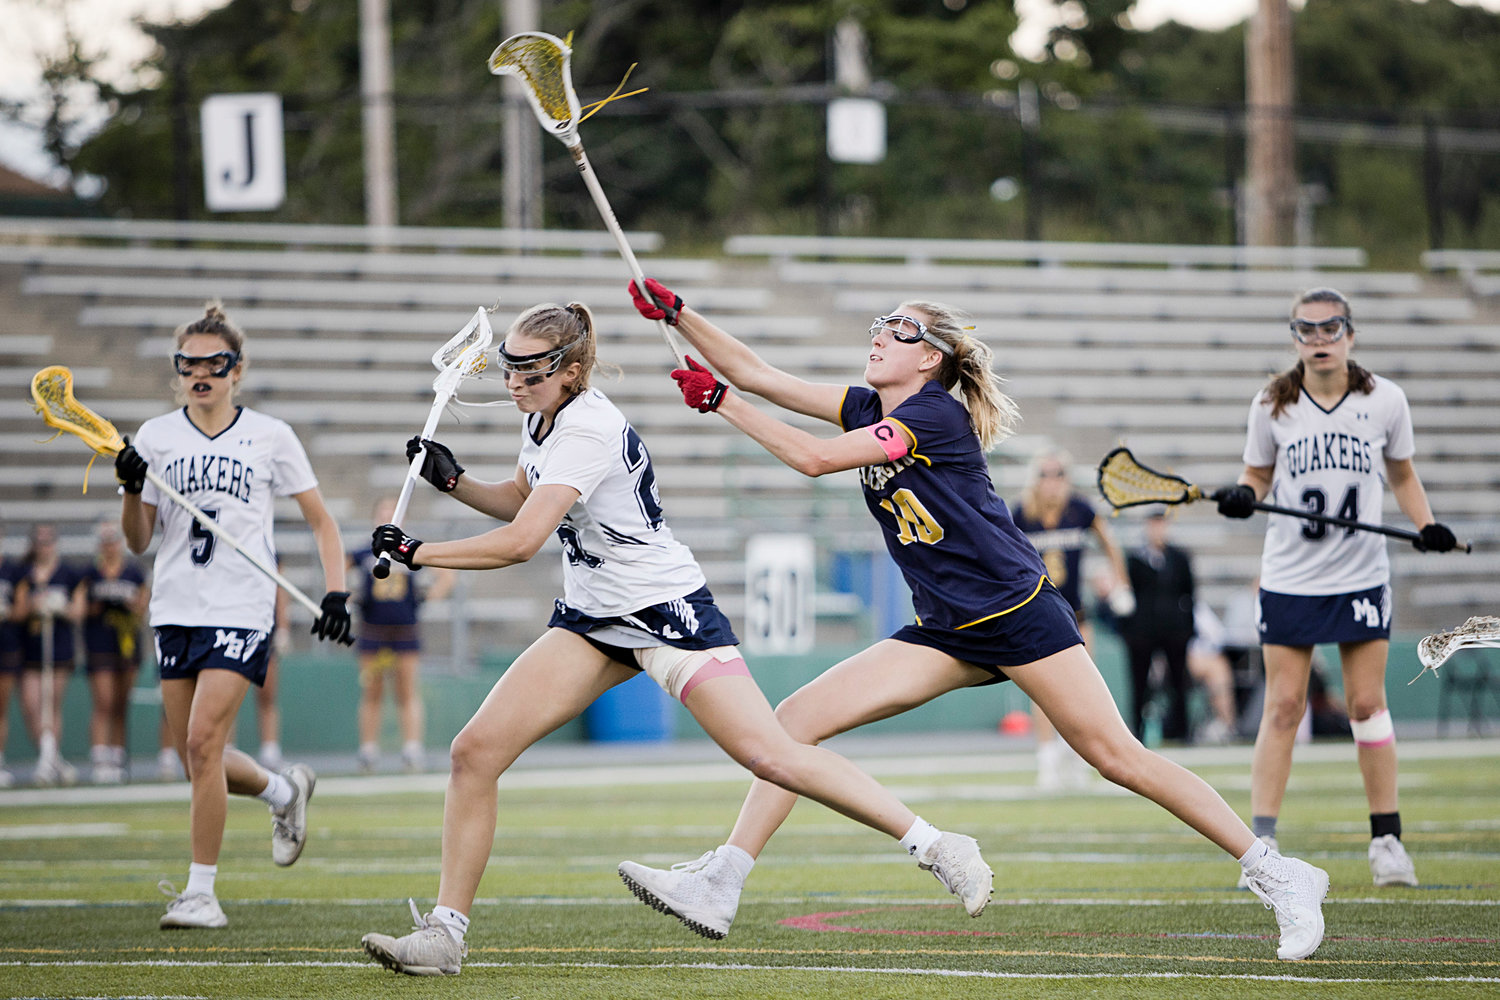 Senior captain Kate Robertson runs down a Moses Brown opponent with a stick-check from behind.